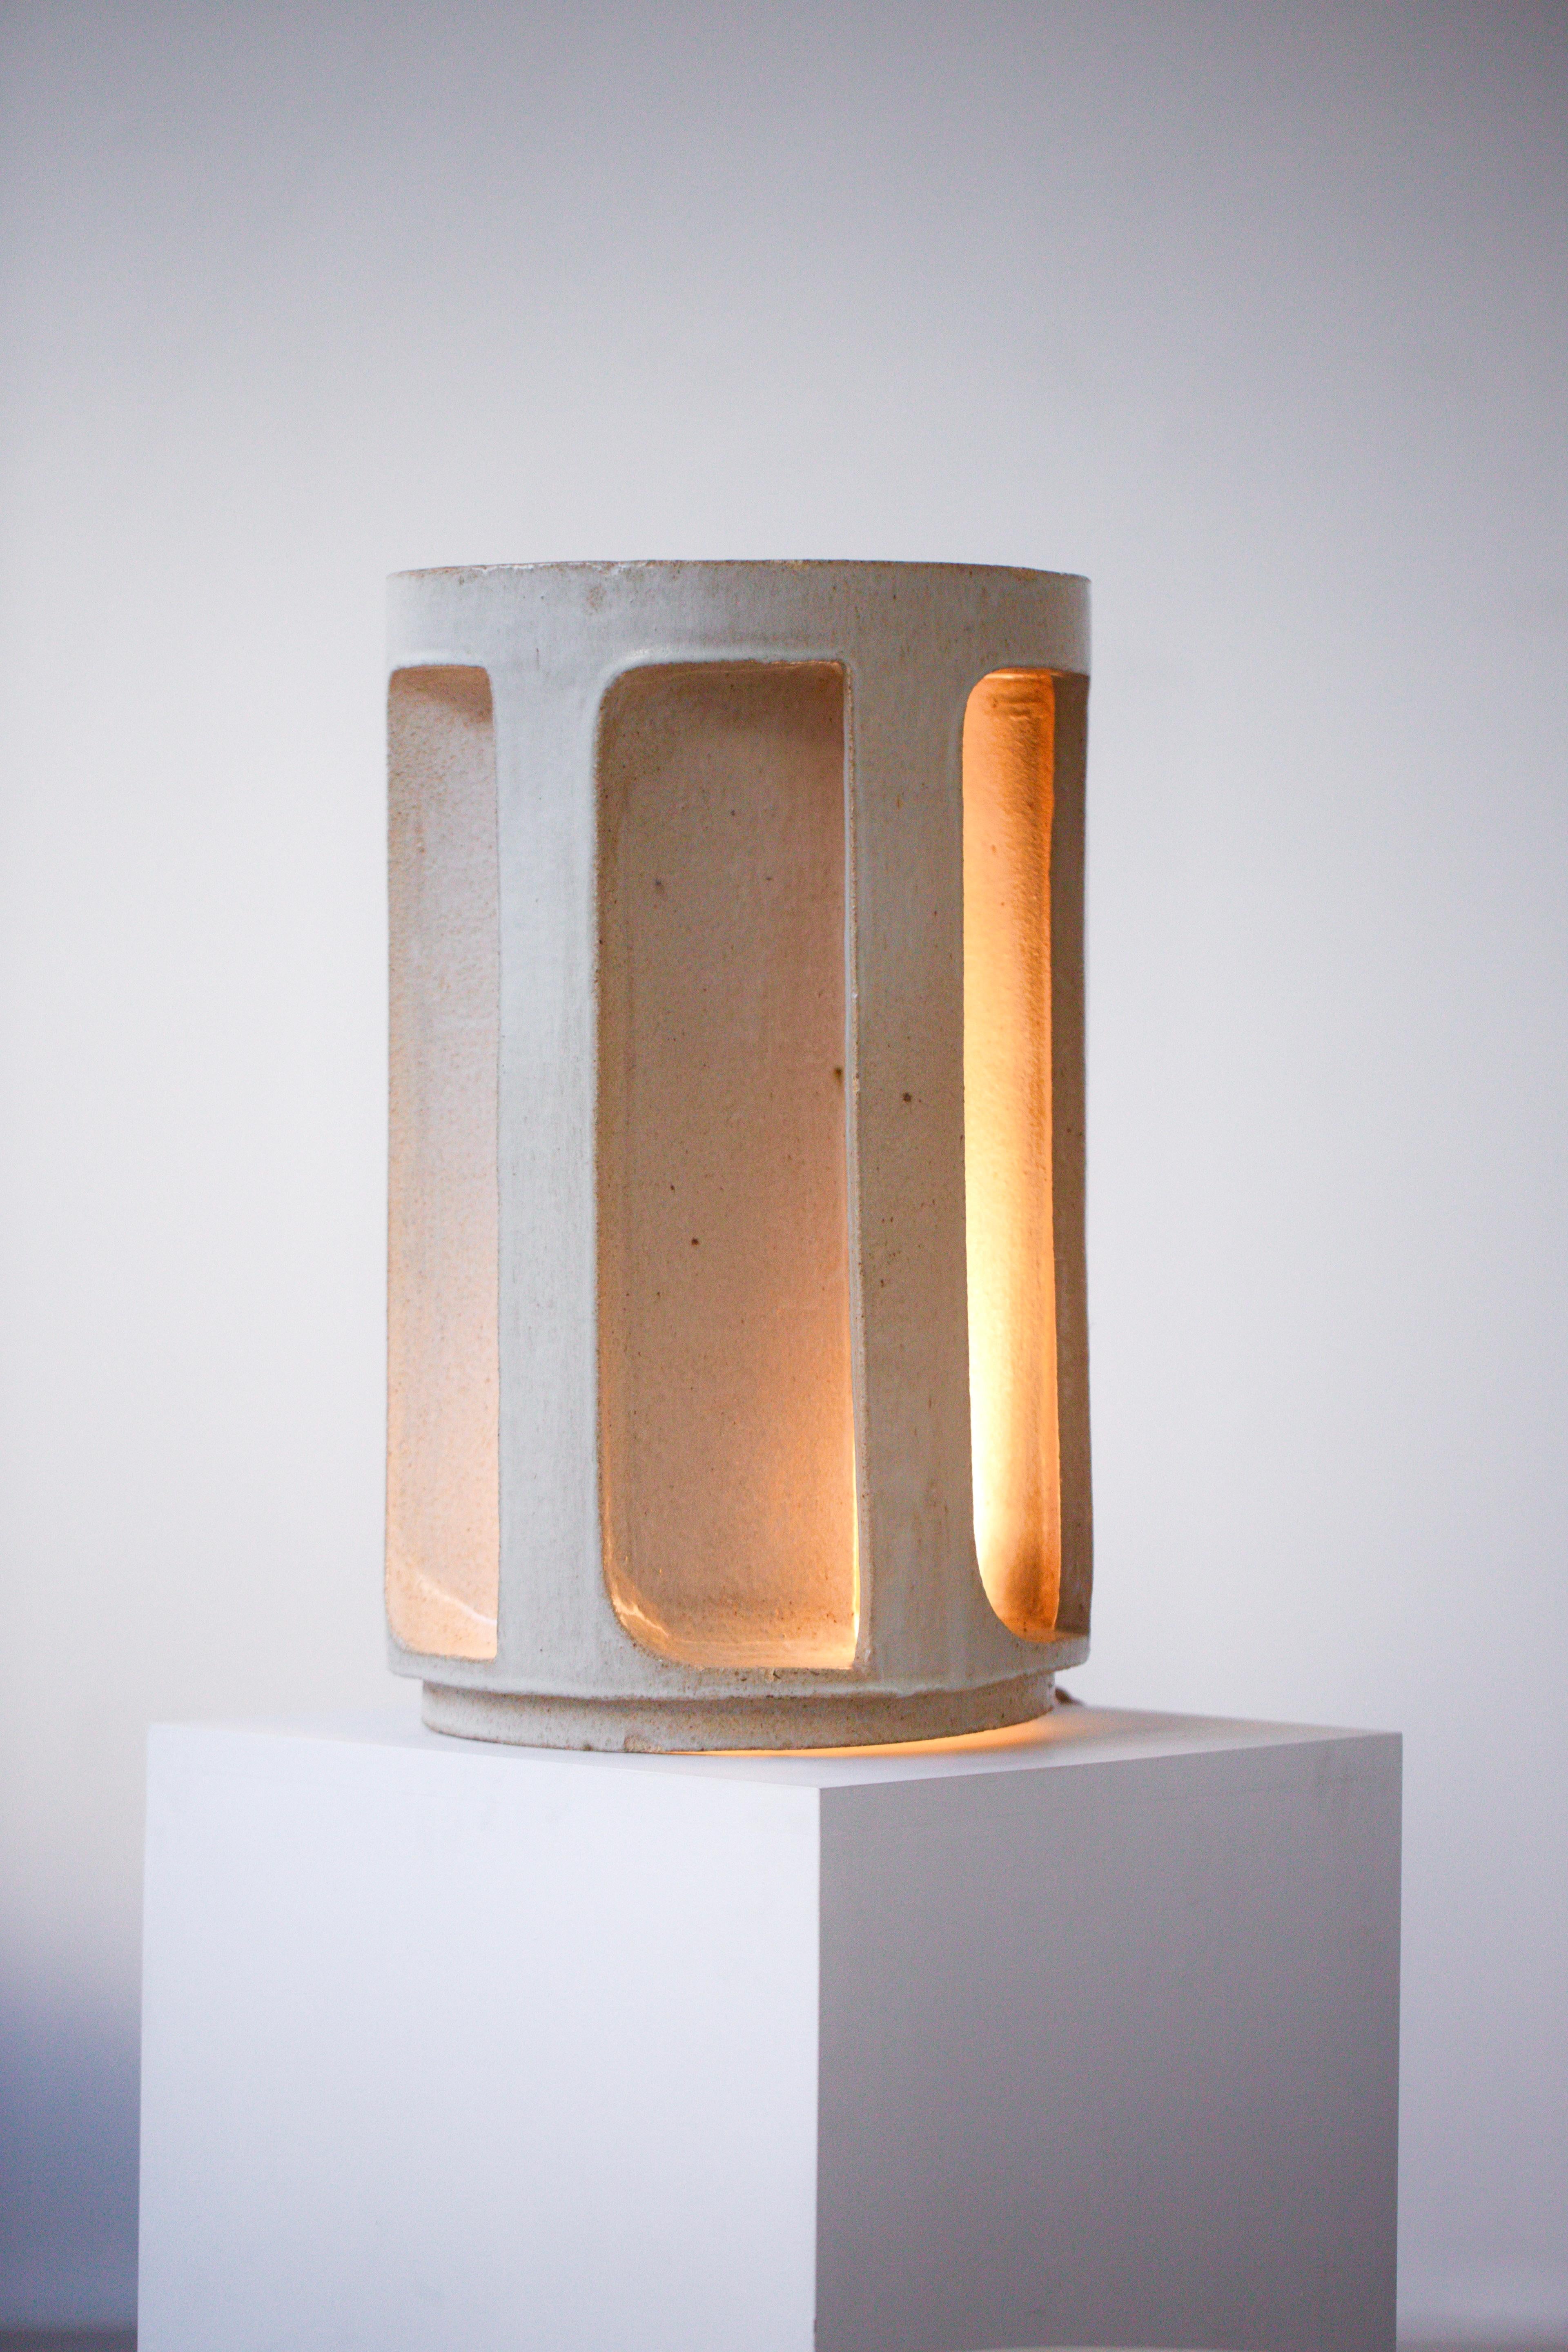 A unique beige glazed ceramic lamp. Large piece, circa 1970, signed below Pierre Bareff (probably Guy Bareff's family), France. Very good vintage condition. This work recalls in a significant way the iconic vocabulary that characterized the œuvre of